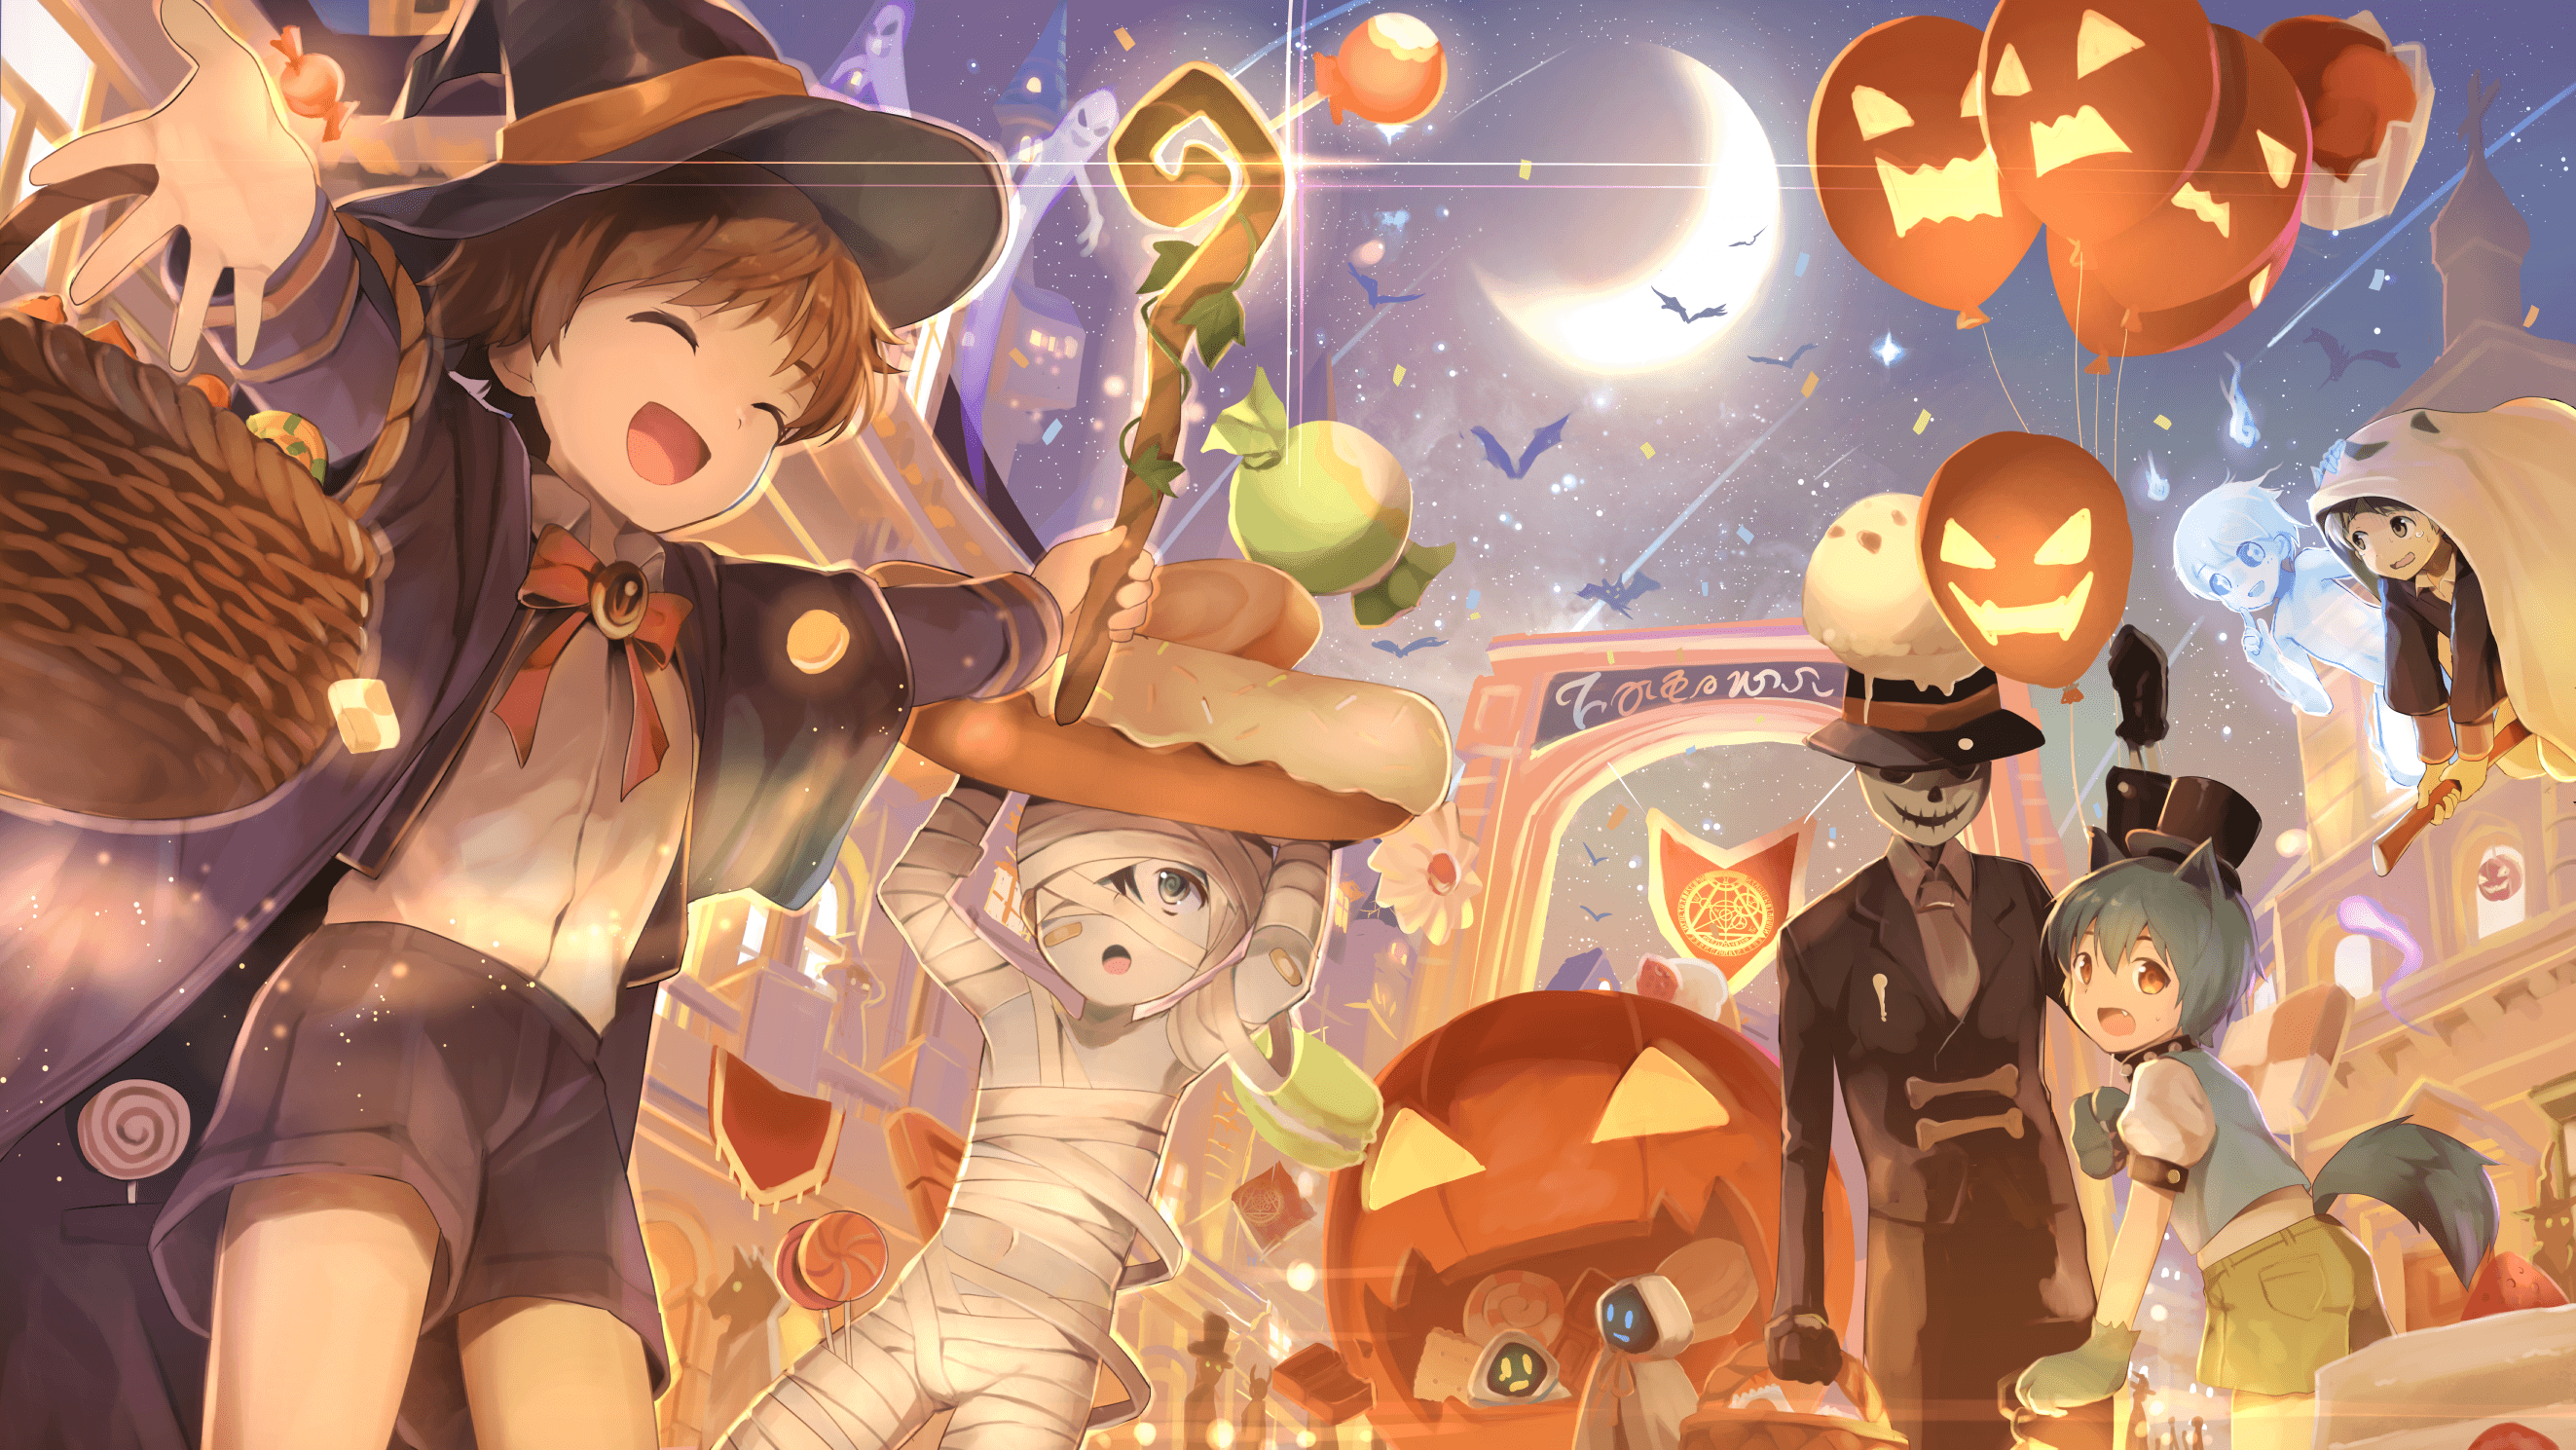 Aesthetic Halloween Anime Wallpapers Wallpaper Cave